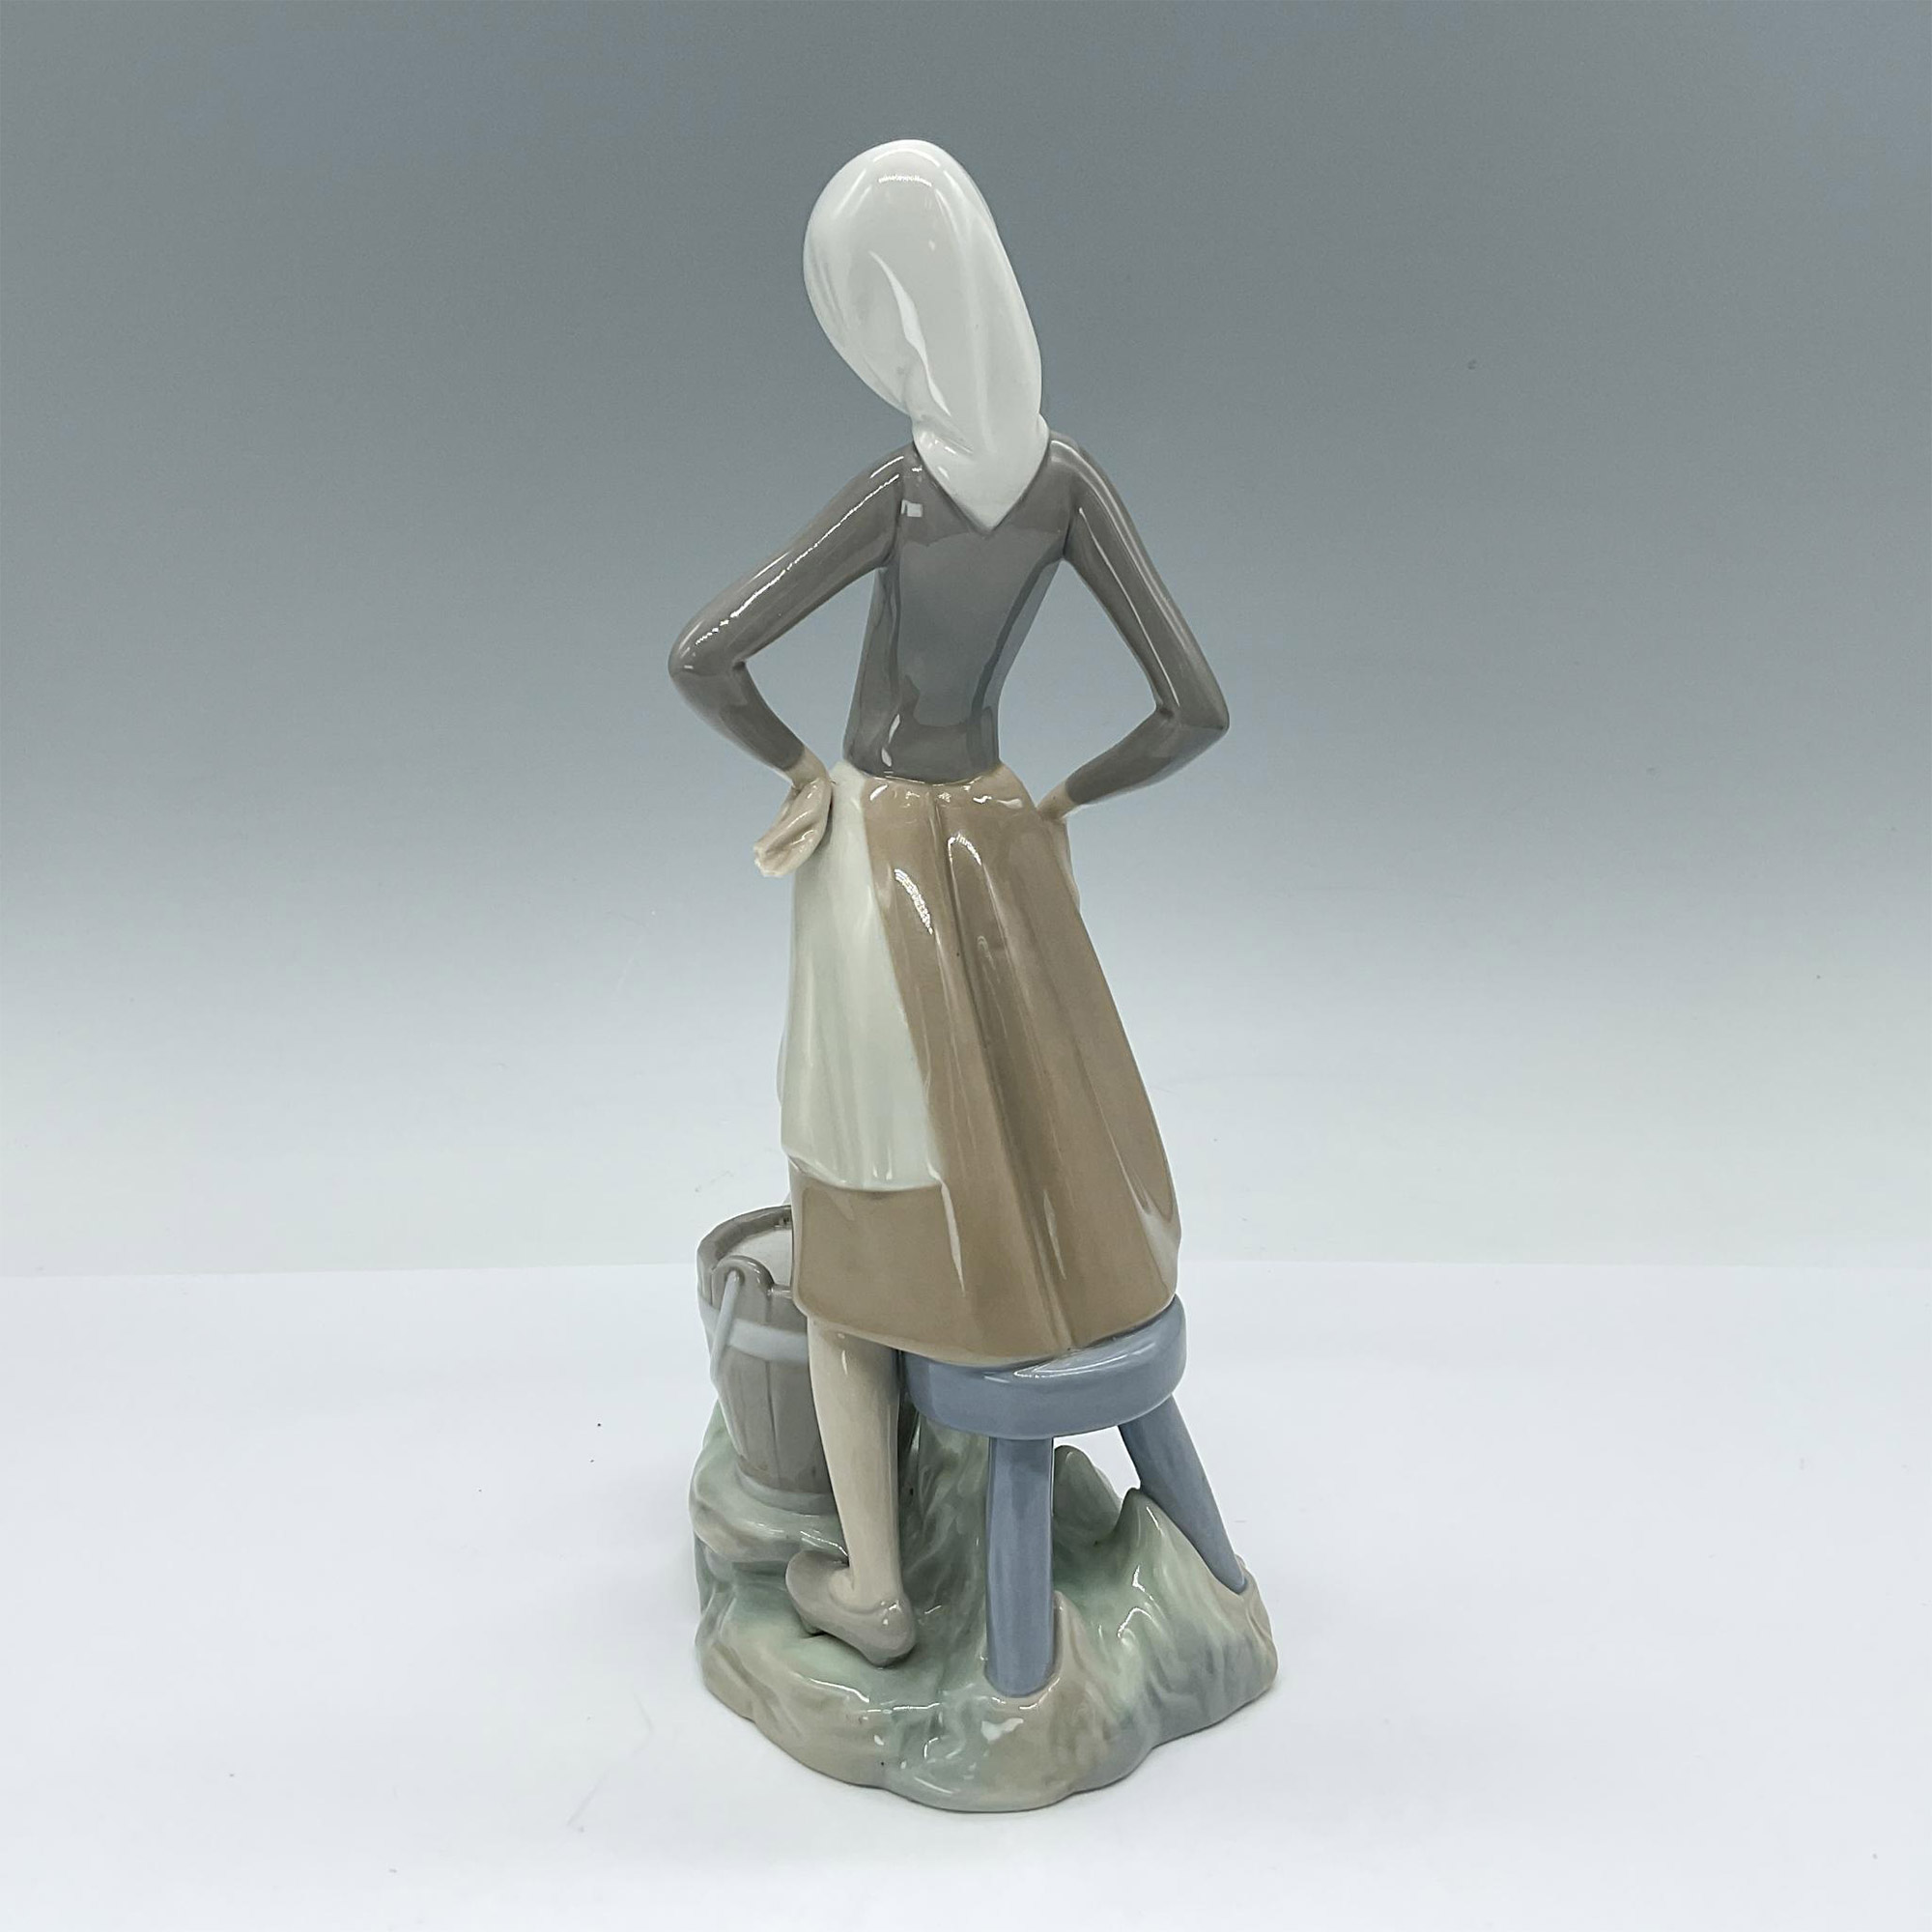 Girl with Milk Pail 1004682 - Lladro Porcelain Figurine - Image 2 of 3